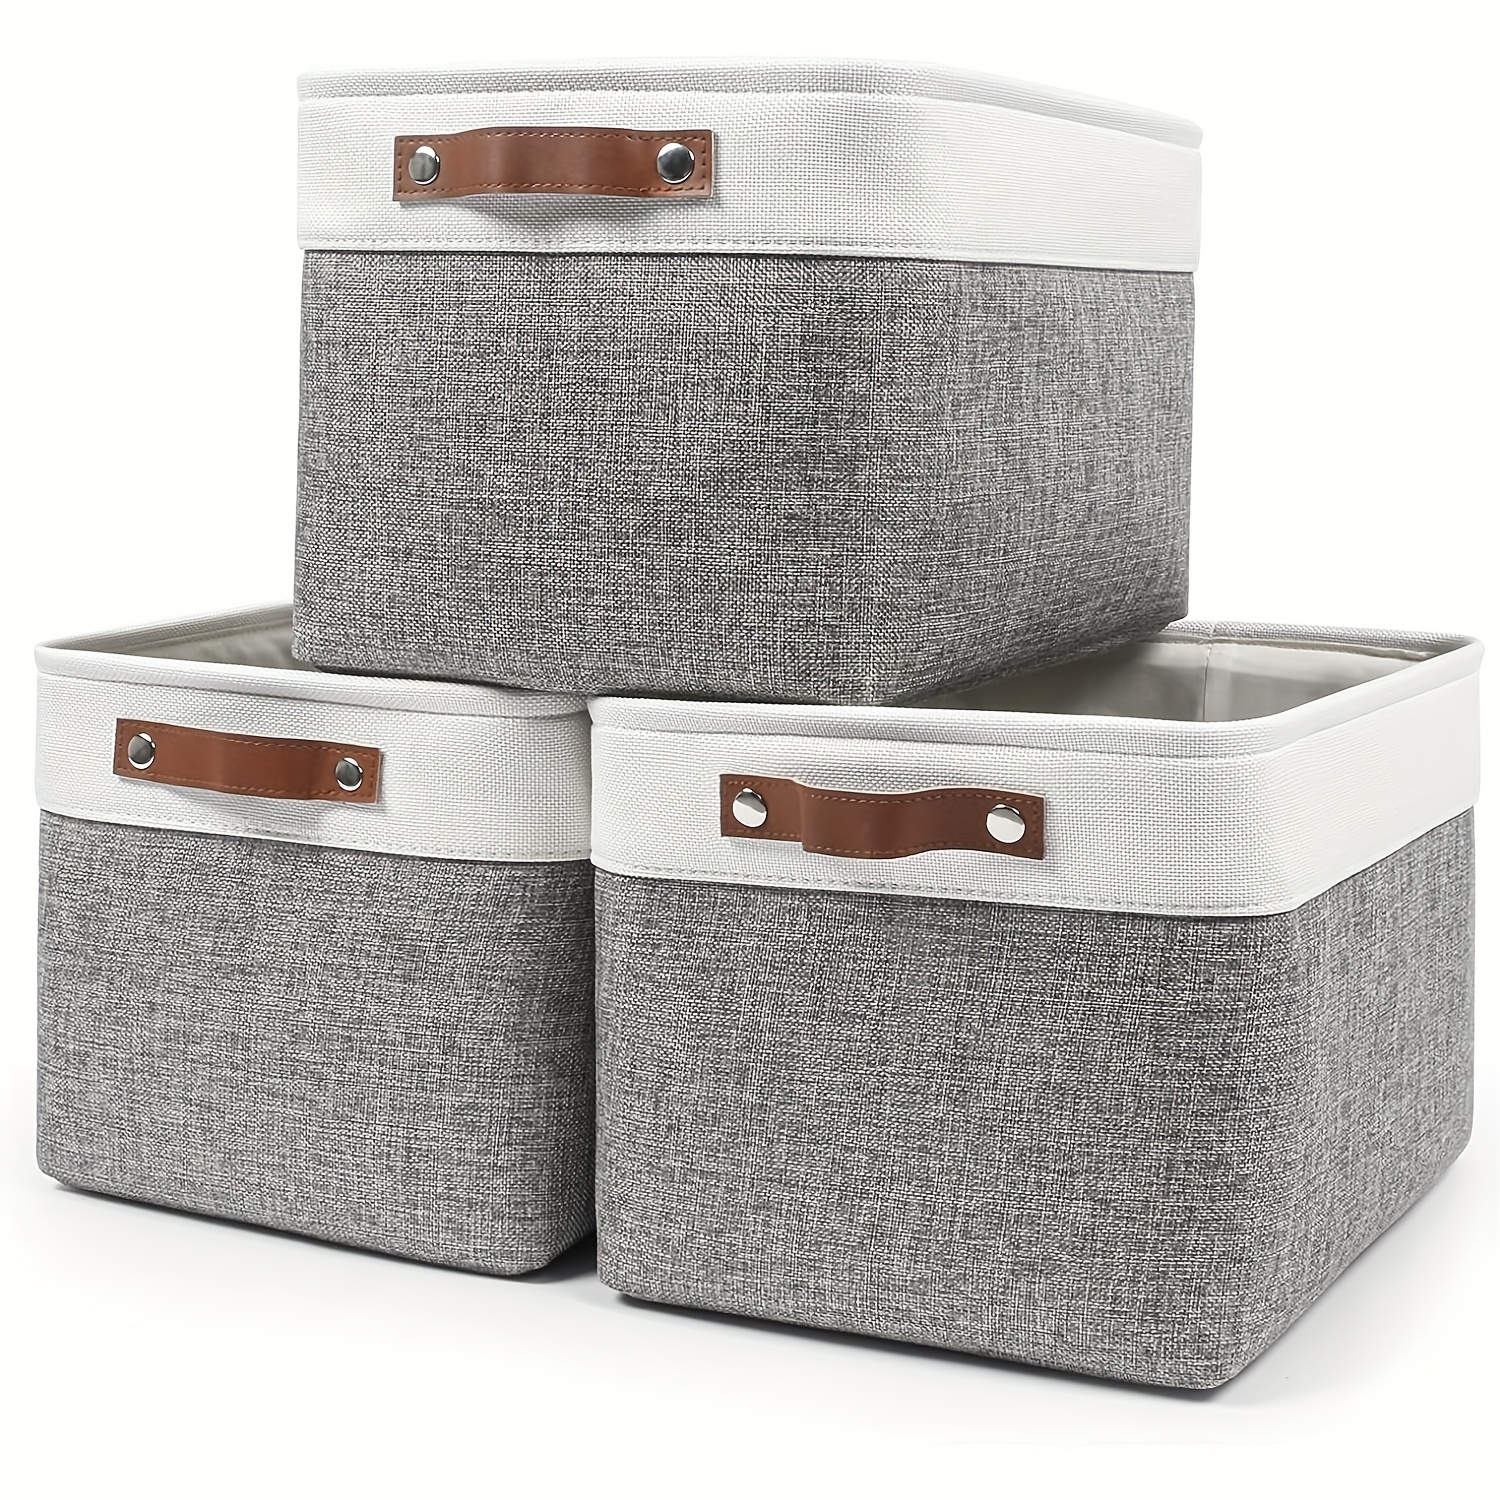 NEATERIZE Woven Storage Baskets For Organizing - Set Of 9 Fabric Empty Organizer  Bins With Handles - Great Bin For Organization & Closet Shelves (Grey)